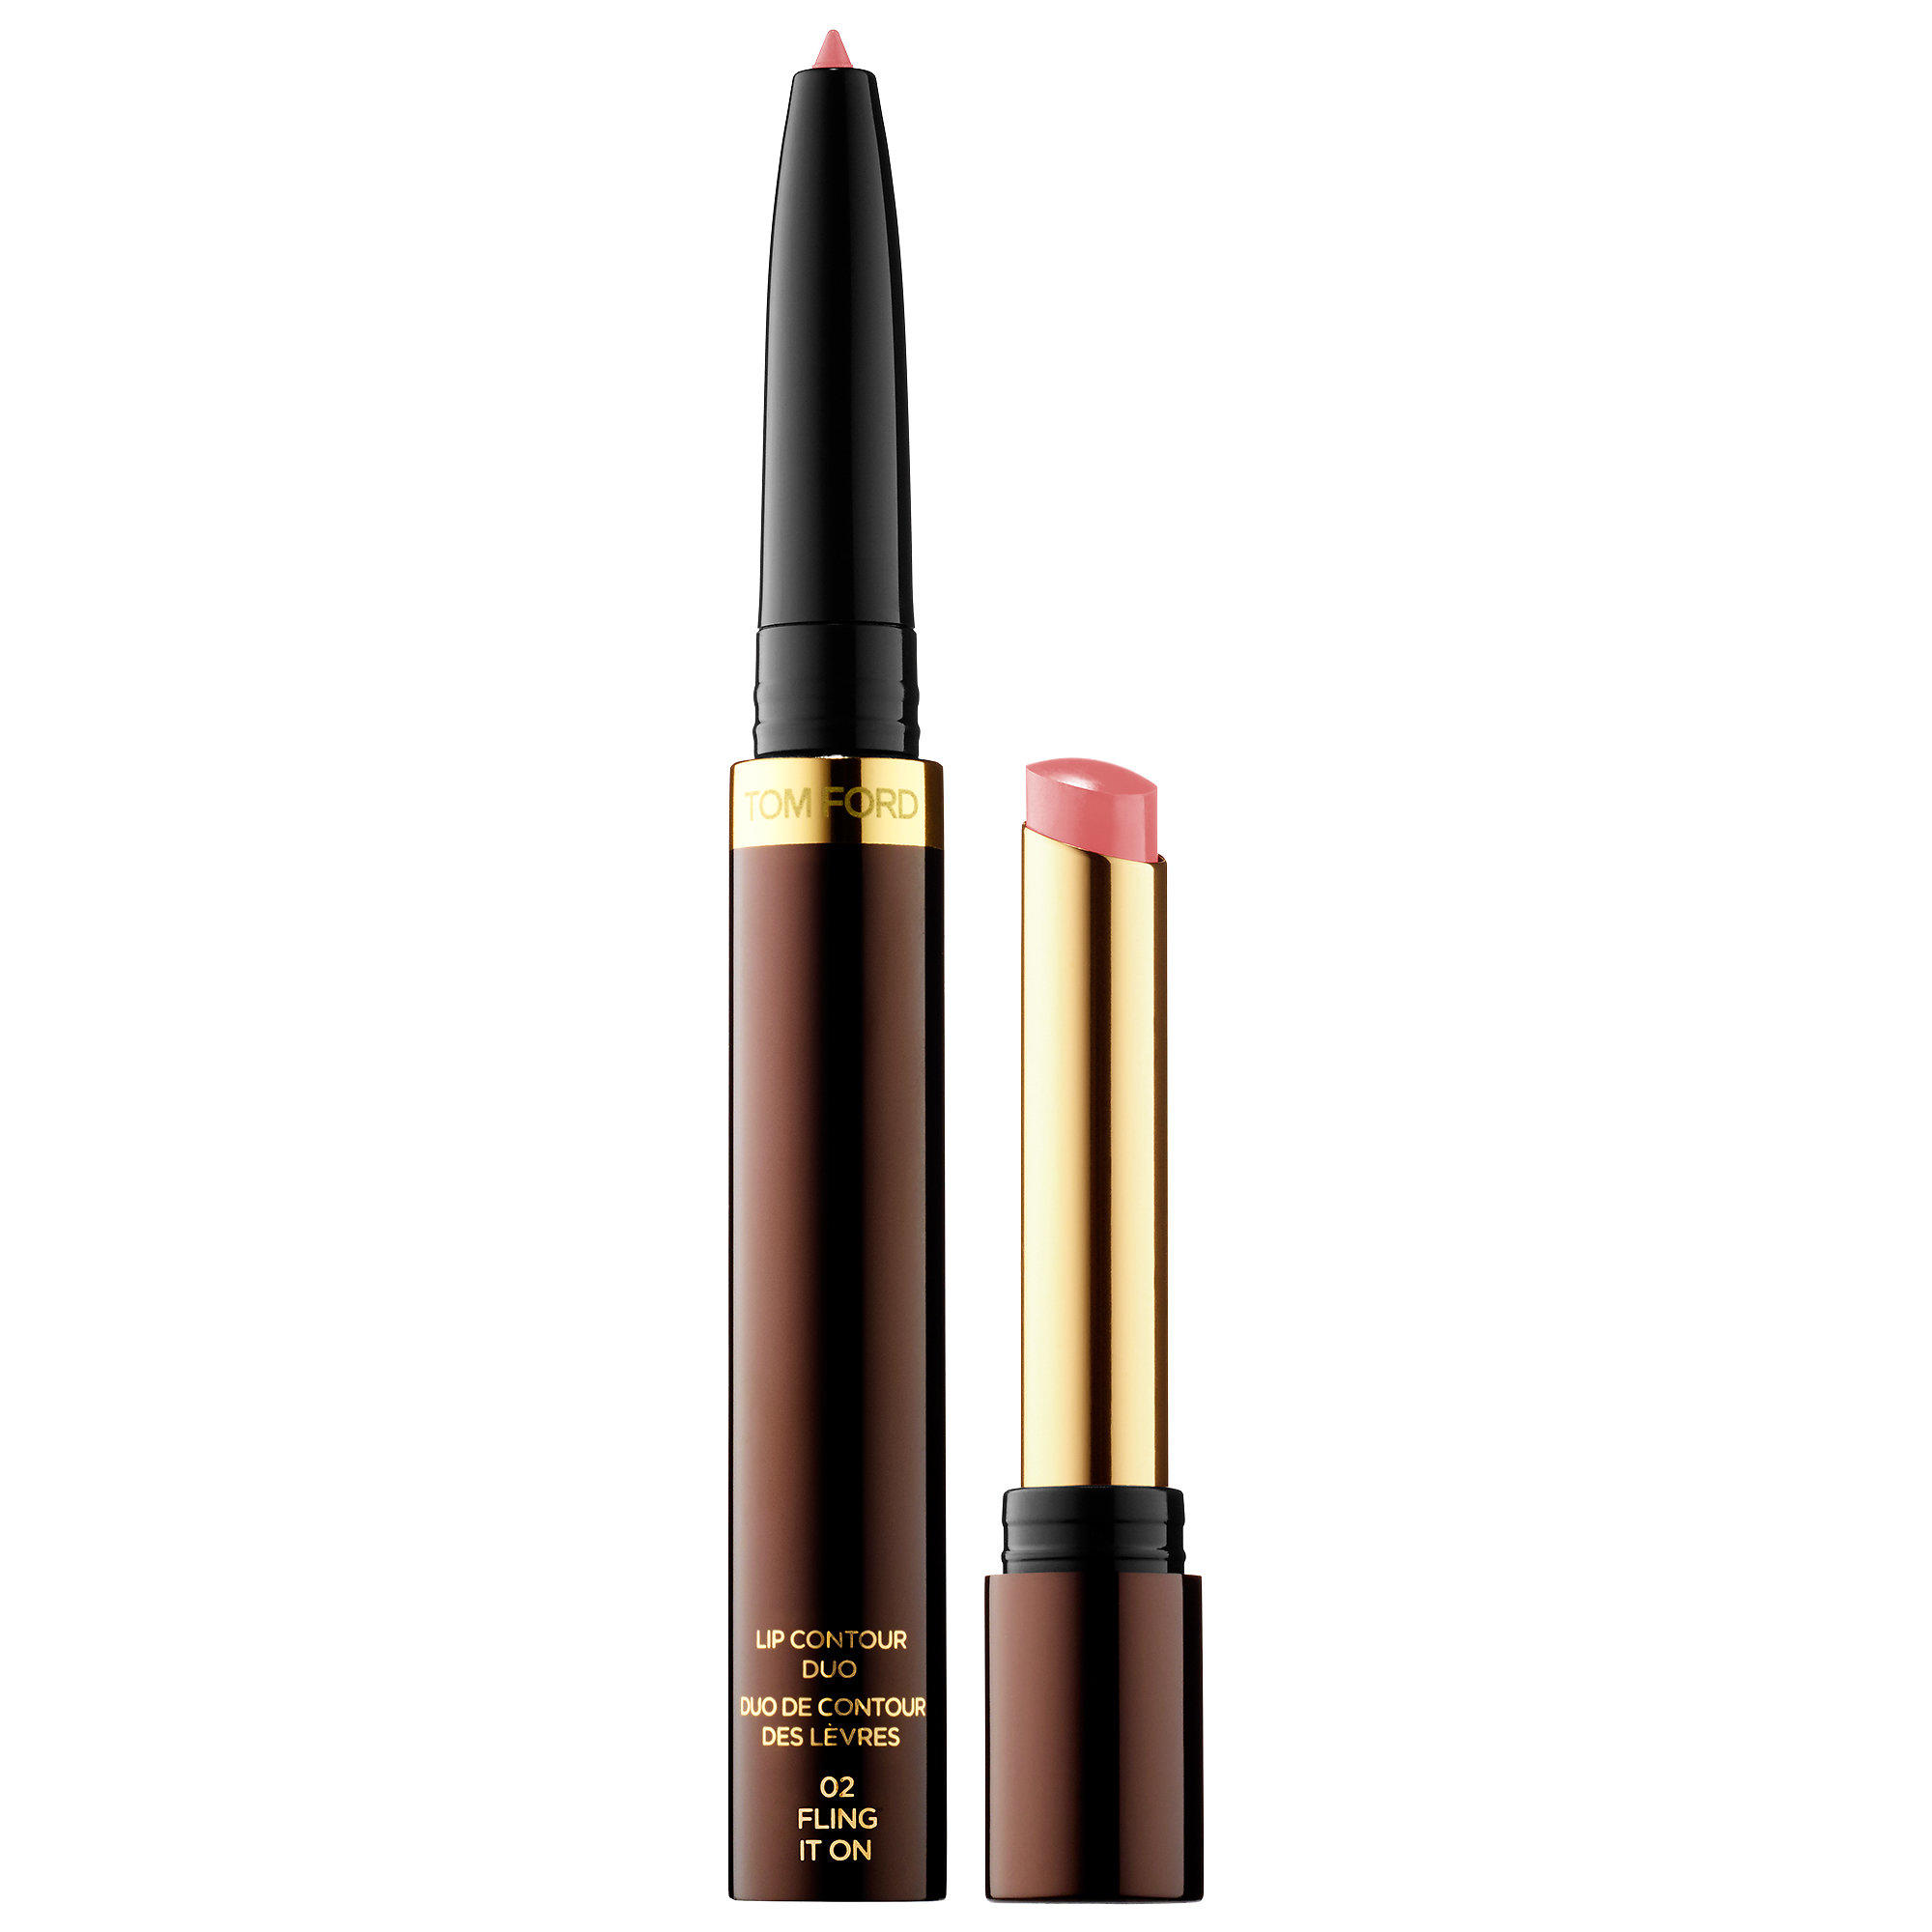 Tom Ford Lip Contour Duo Fling It On 02